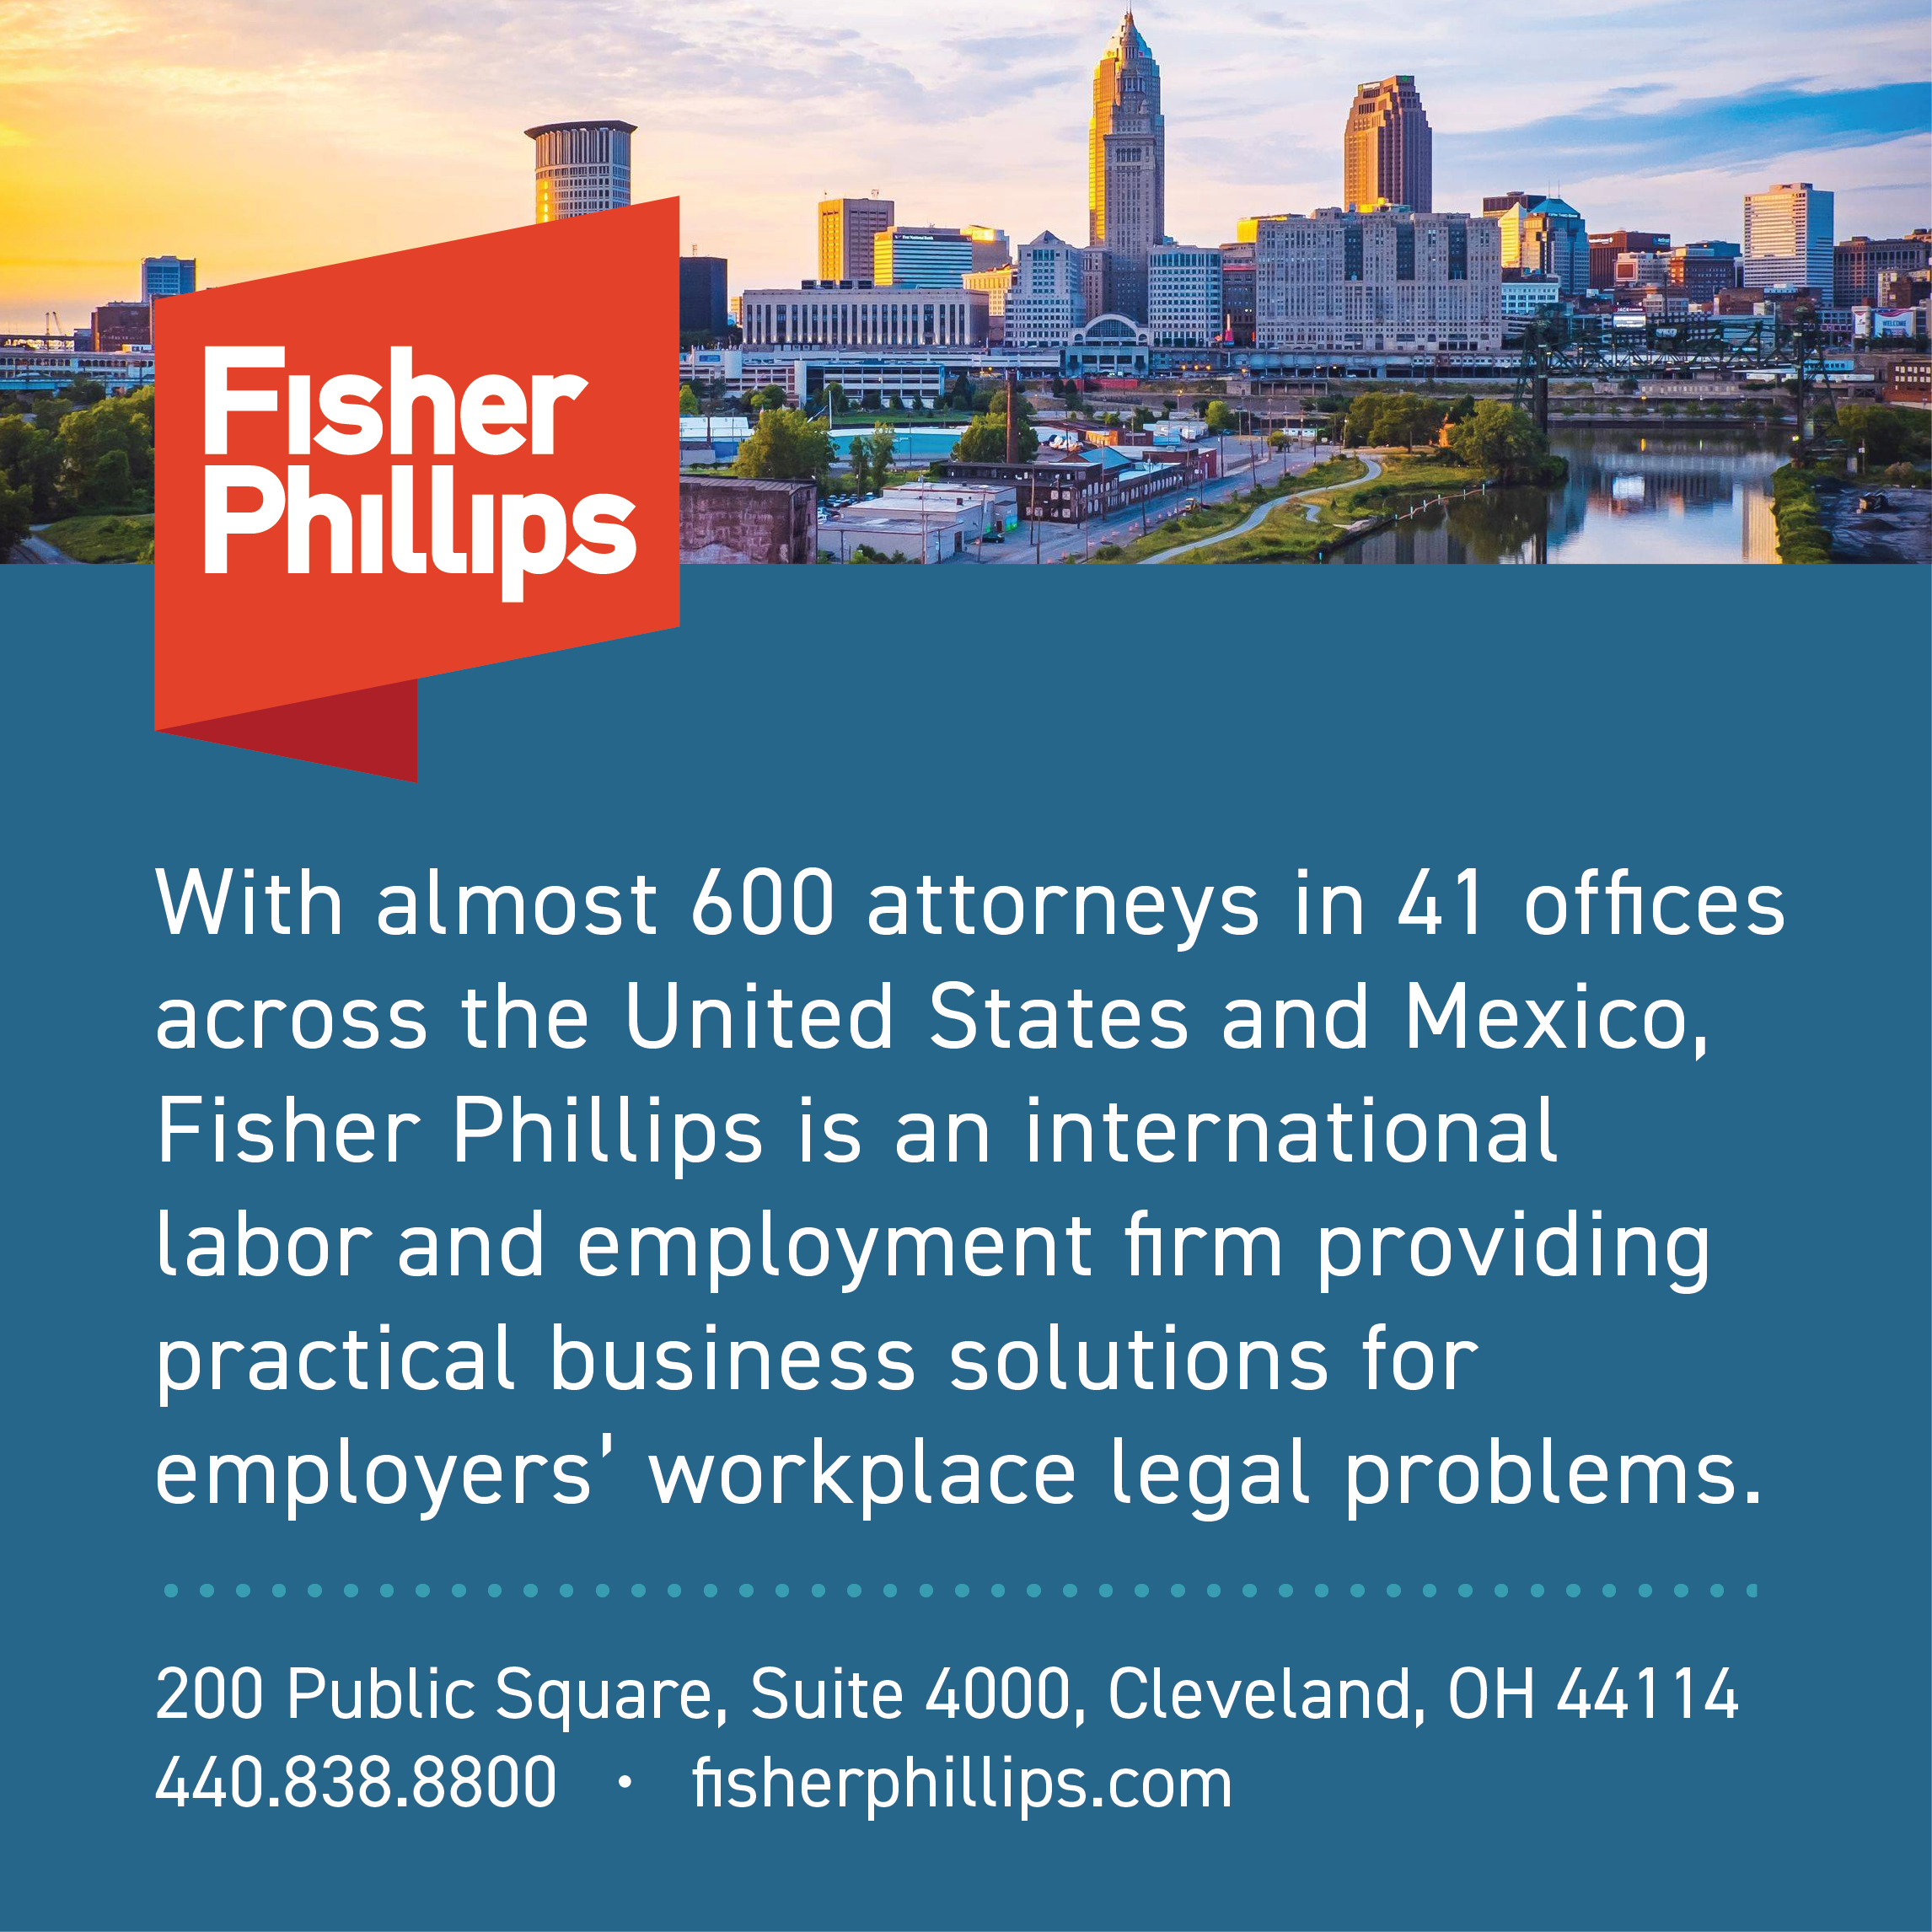 Fisher Phillips ad